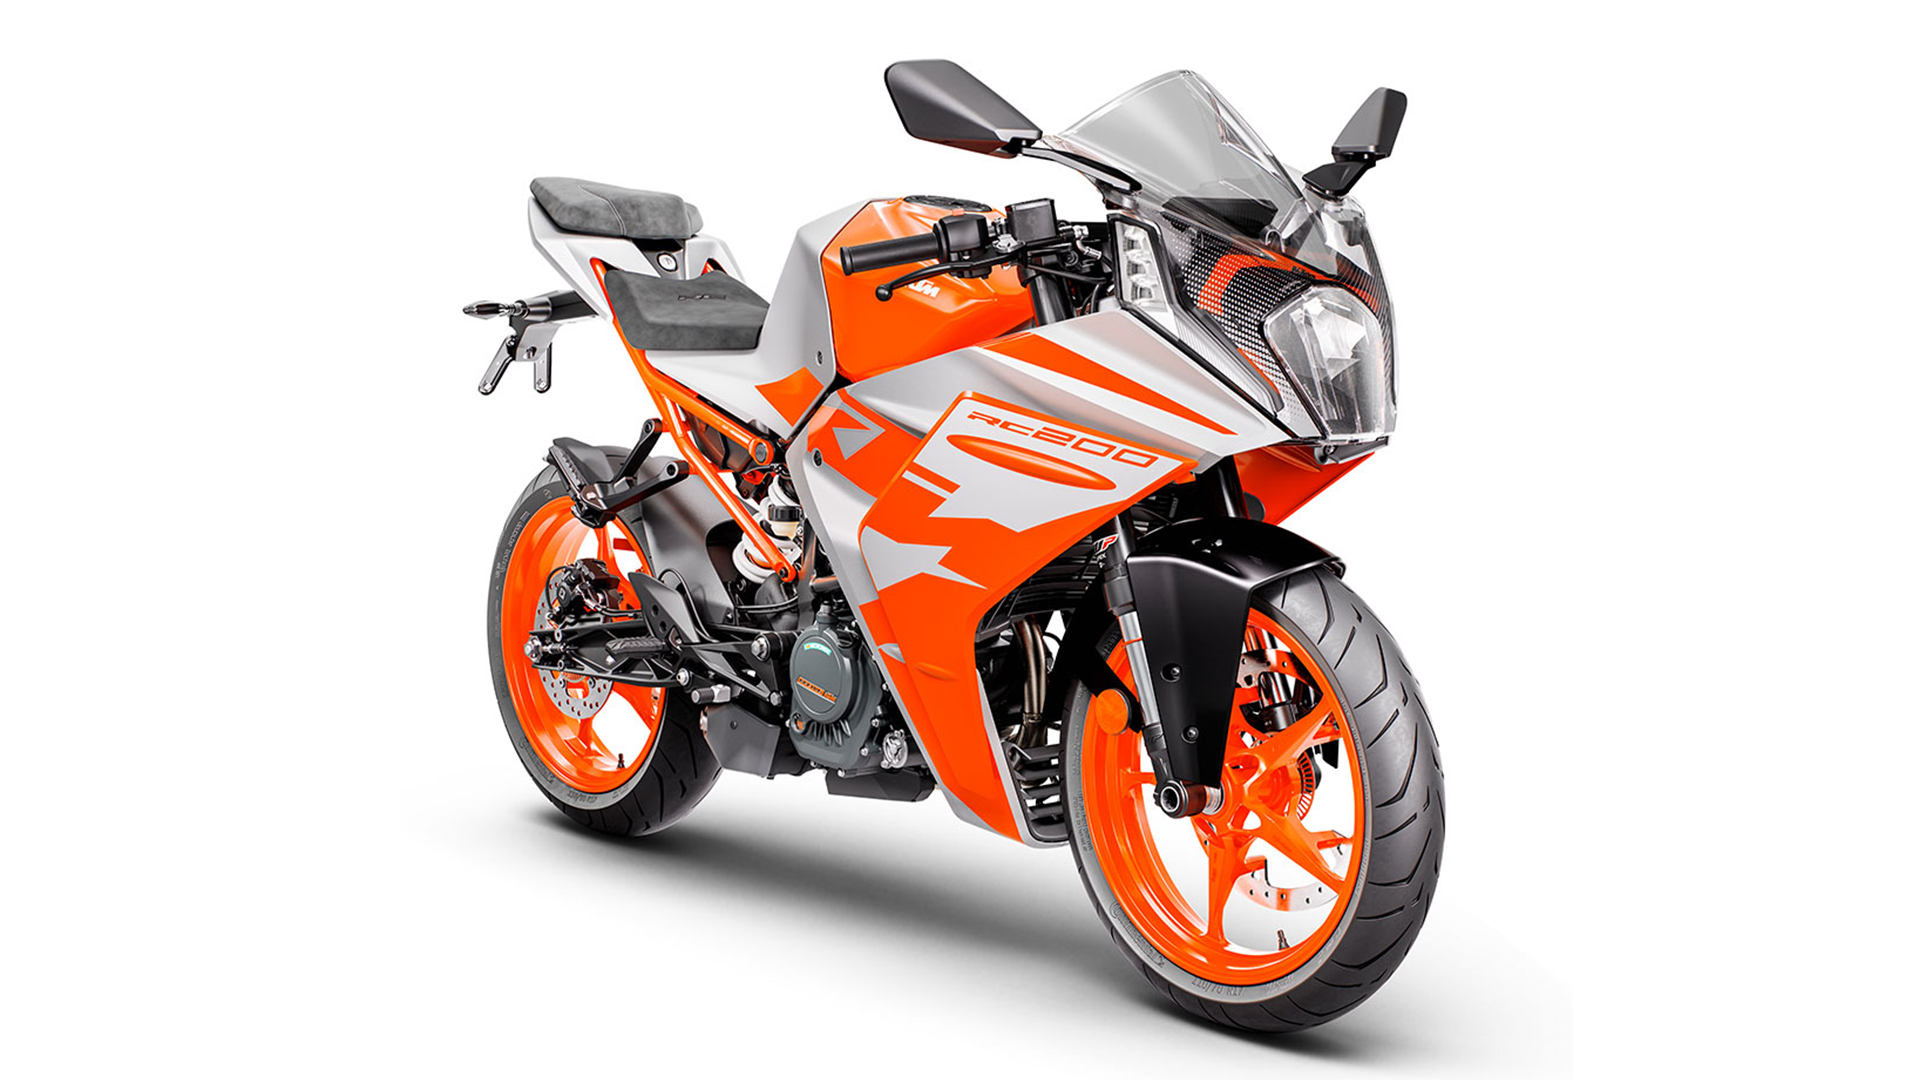 KTM RC 200 2022 - Price in India, Mileage, Reviews, Colours, Specification,  Images - Overdrive